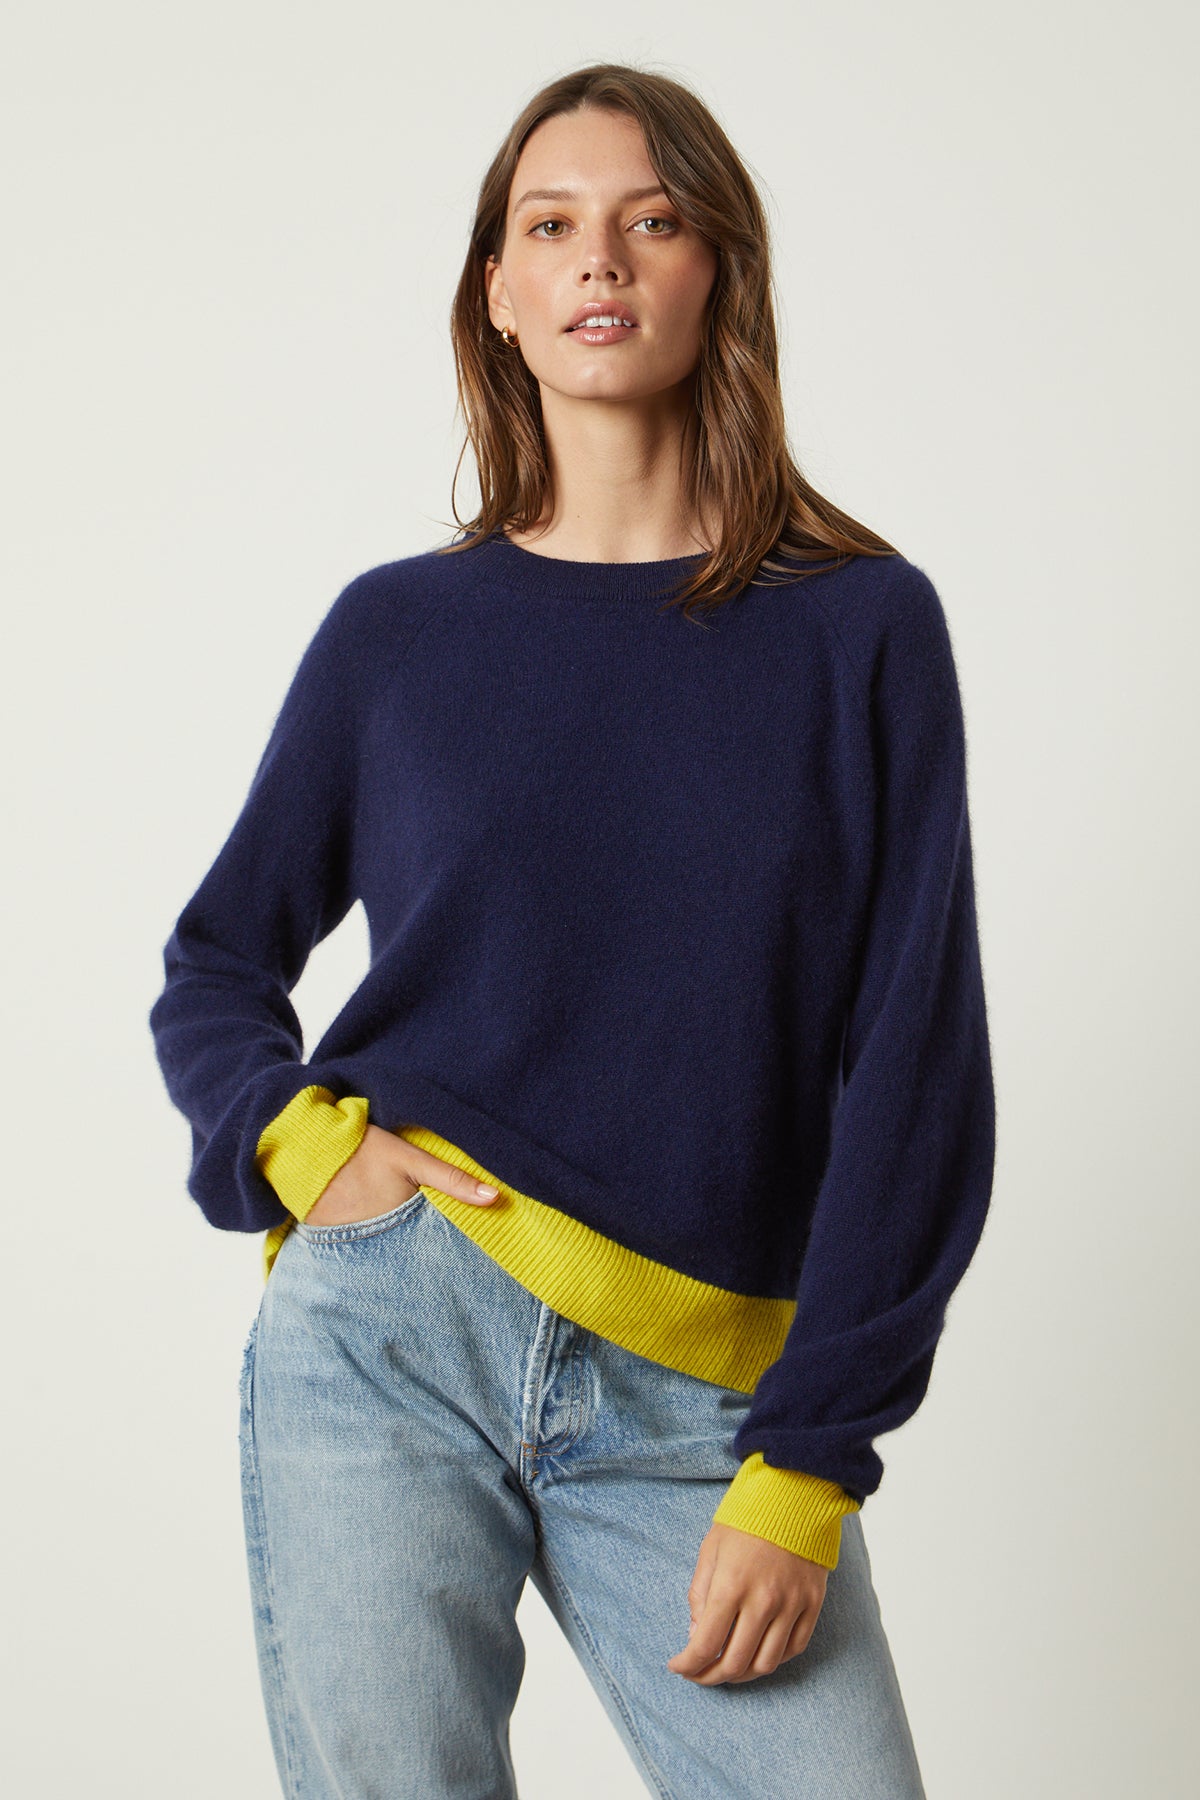 the model is wearing jeans and a Velvet by Graham & Spencer CLAIRE CASHMERE CREW NECK SWEATER.-26496314245313